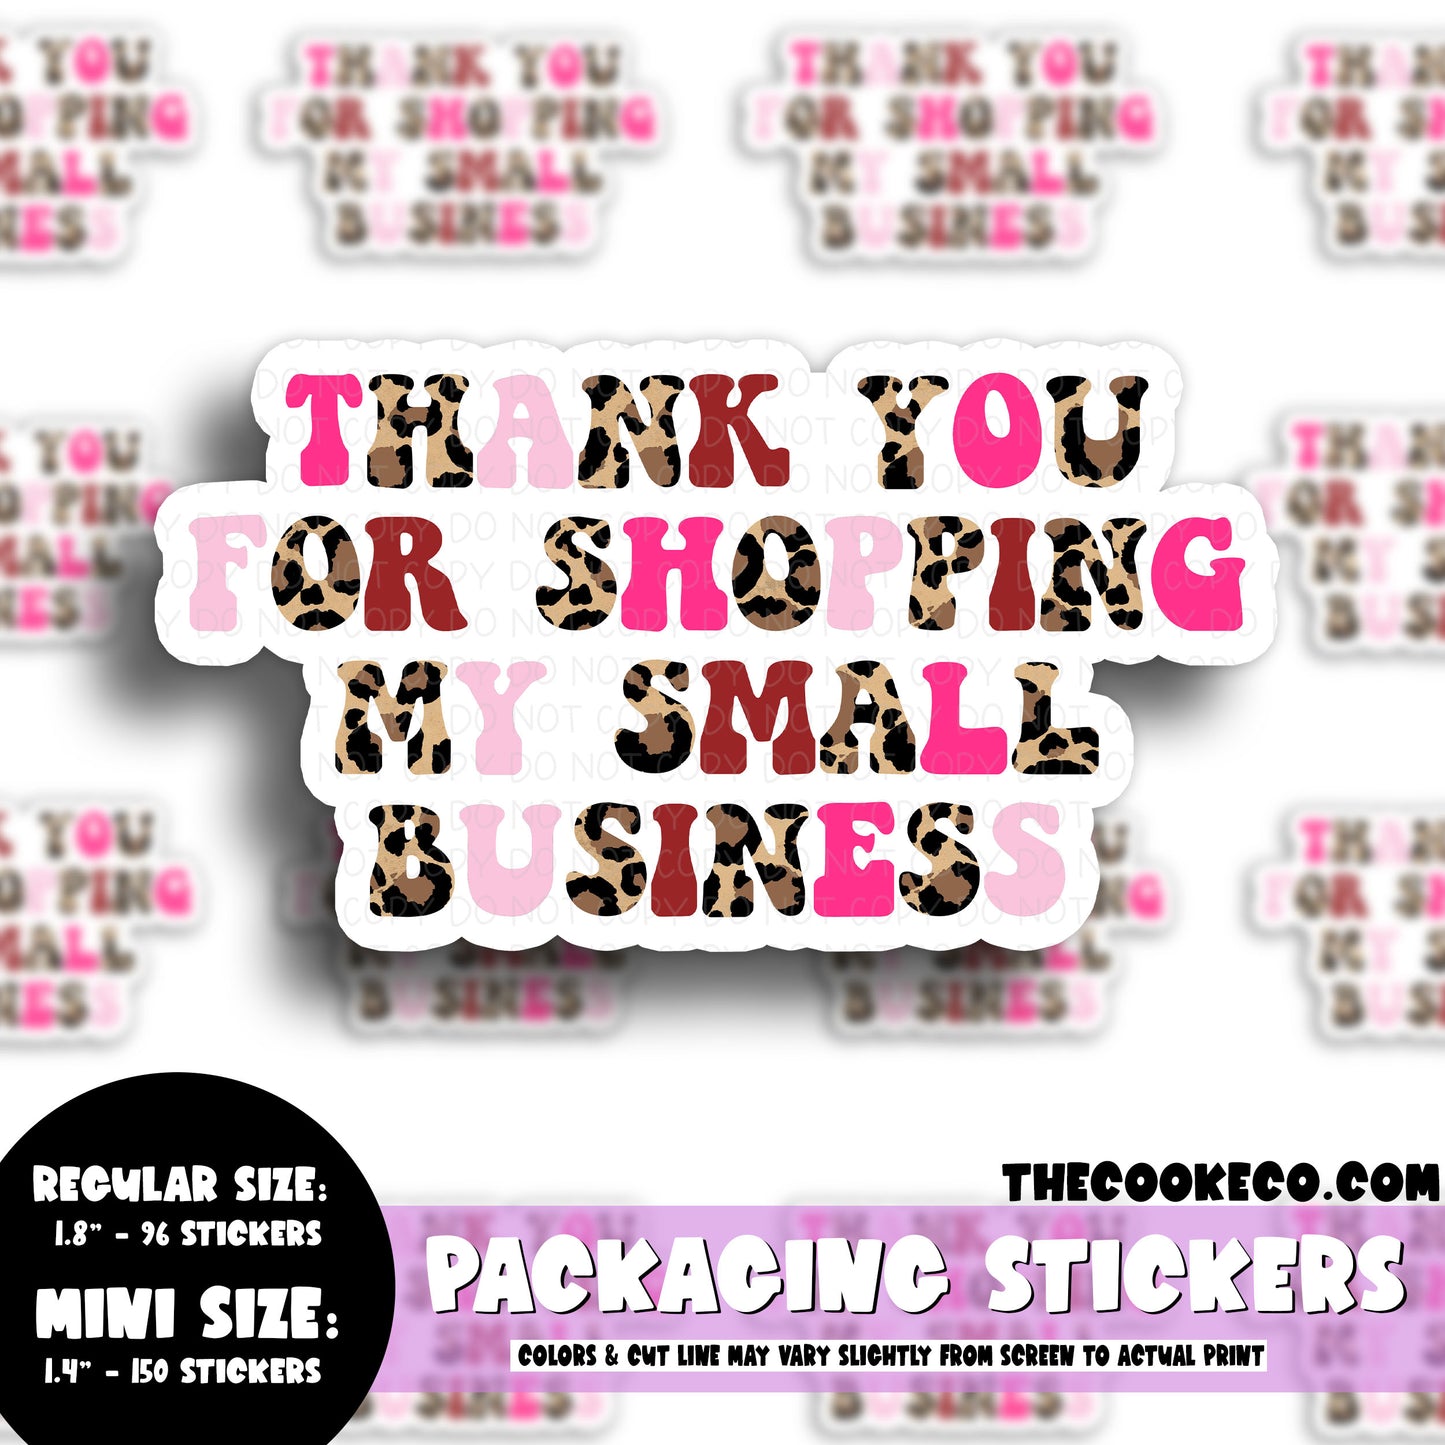 PTO Packaging Stickers | #C0768 - THANK YOU FOR SHOPPING SMALL PINK/LEOPARD